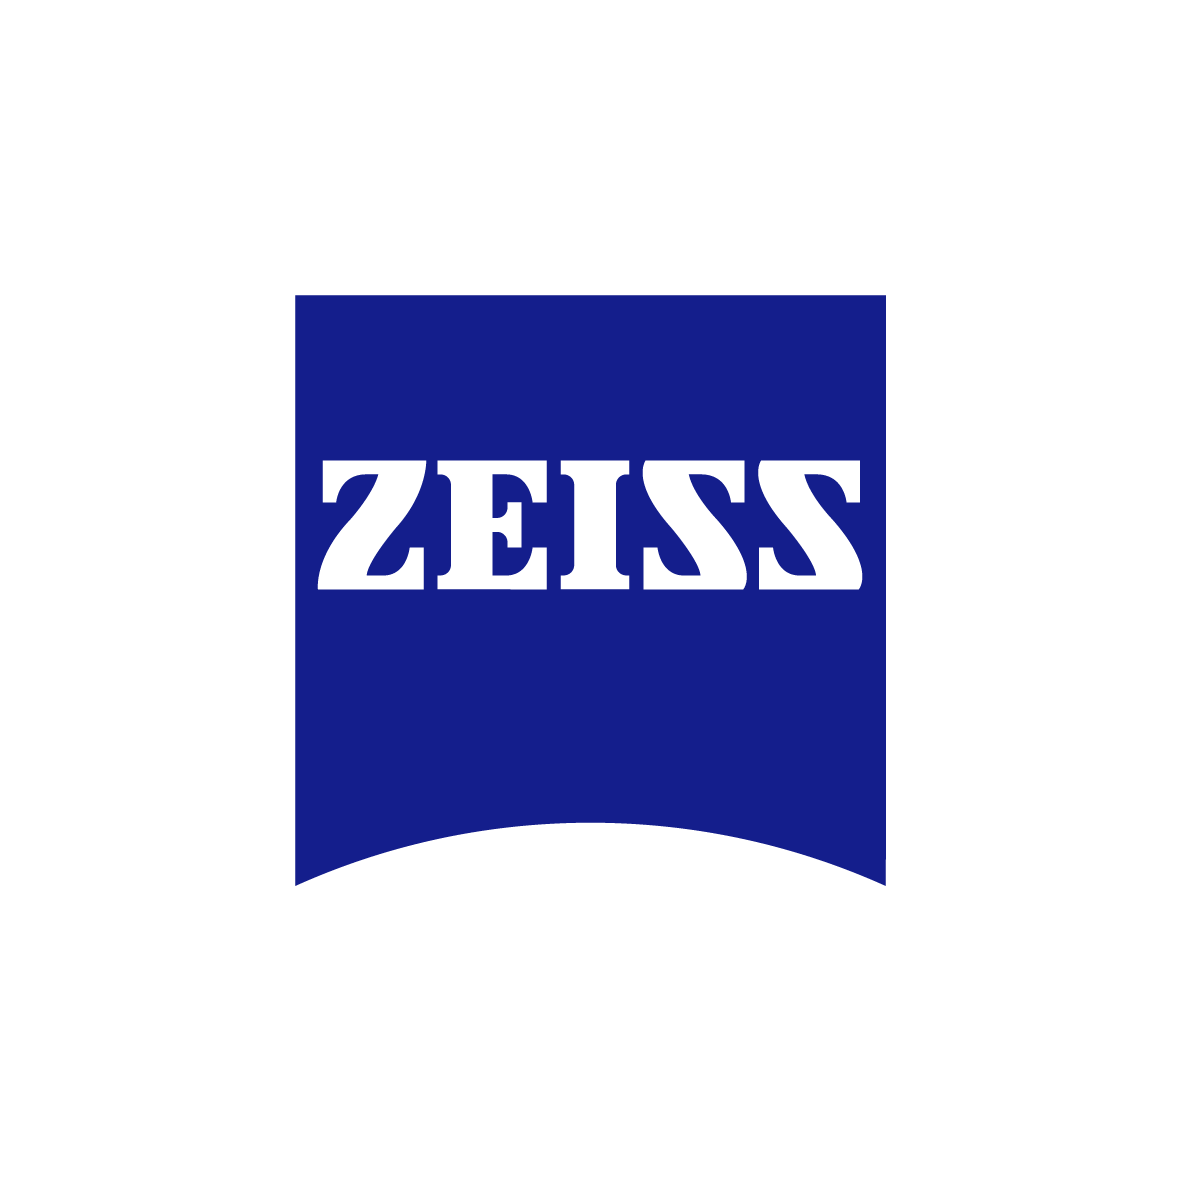 ZEISS Expands Popular Conquest V4 Riflescope Line With Two New Models